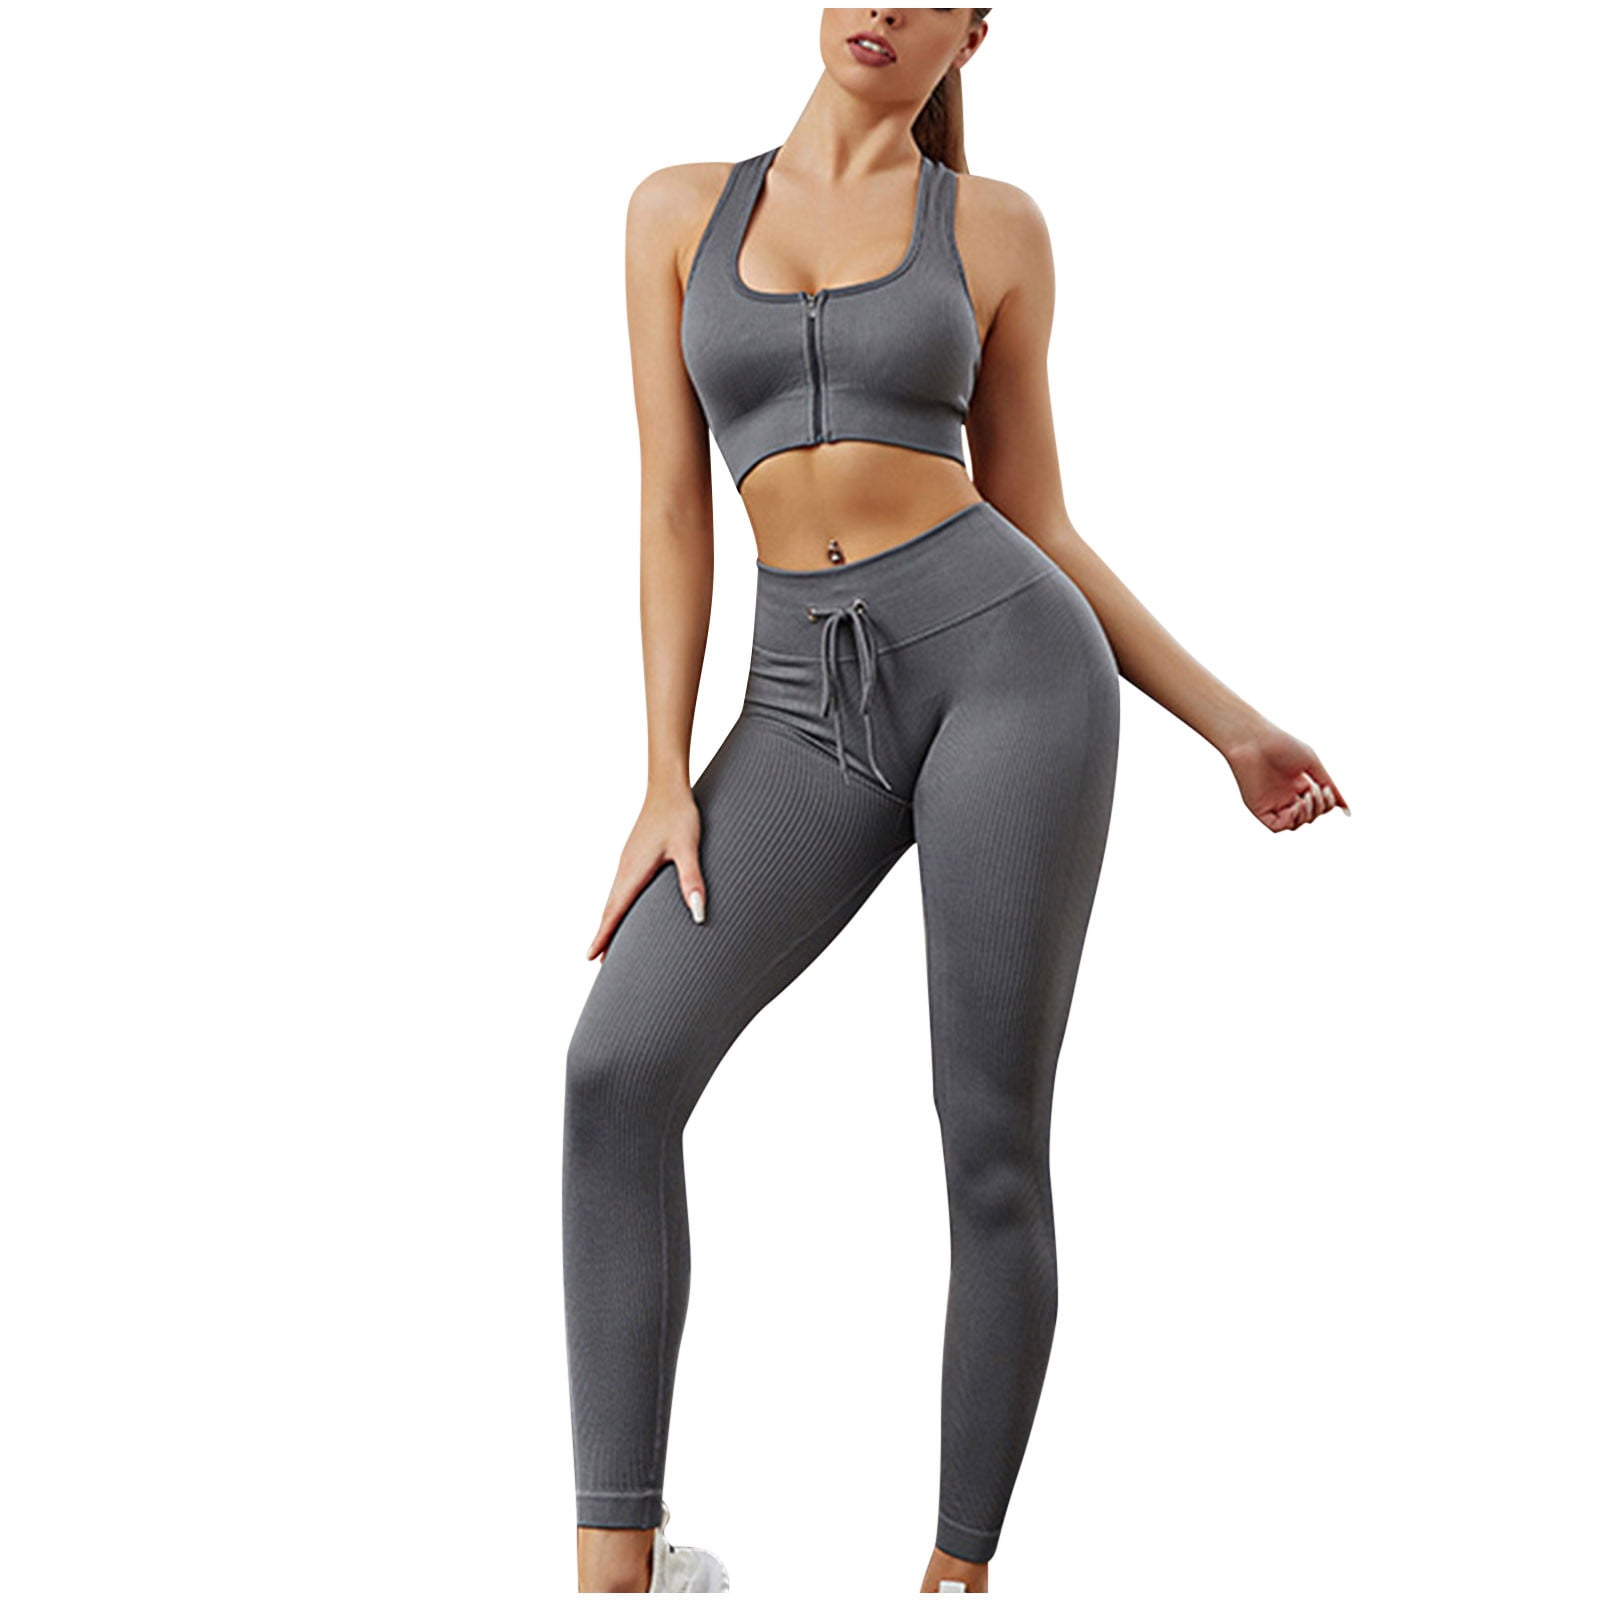 NOVA ACTIVE Workout Sets for Women 2 Piece High Waisted Seamless Leggings  with Padded Stretchy Sports Bra Sets Gym Clothes